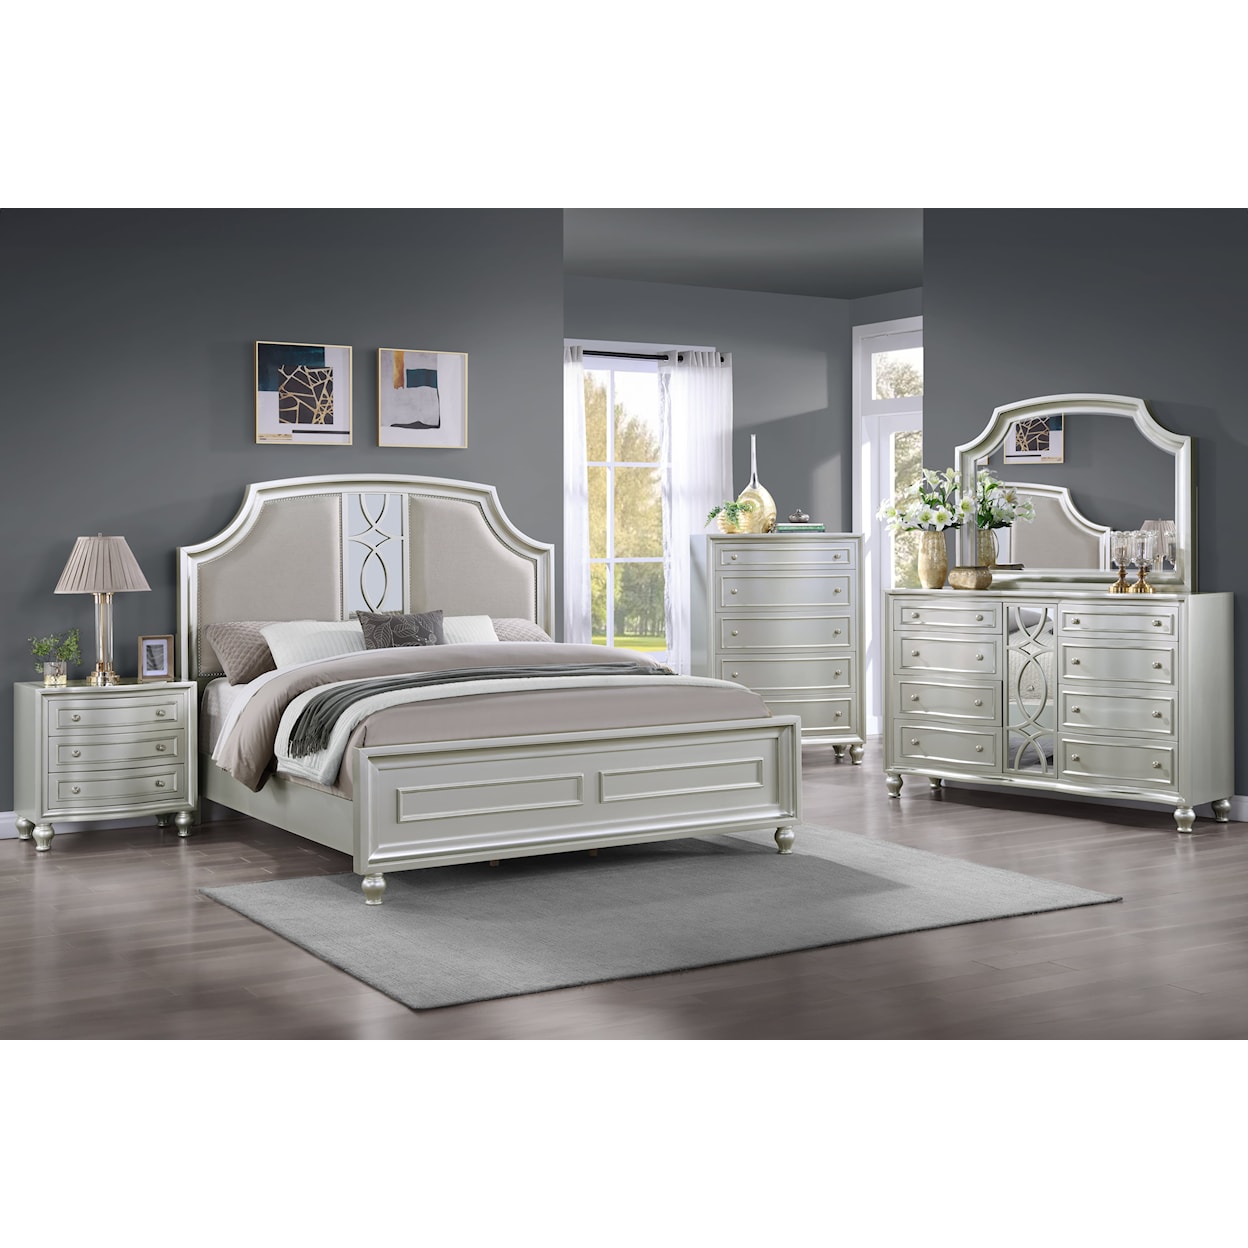 New Classic Reflections Queen Bed